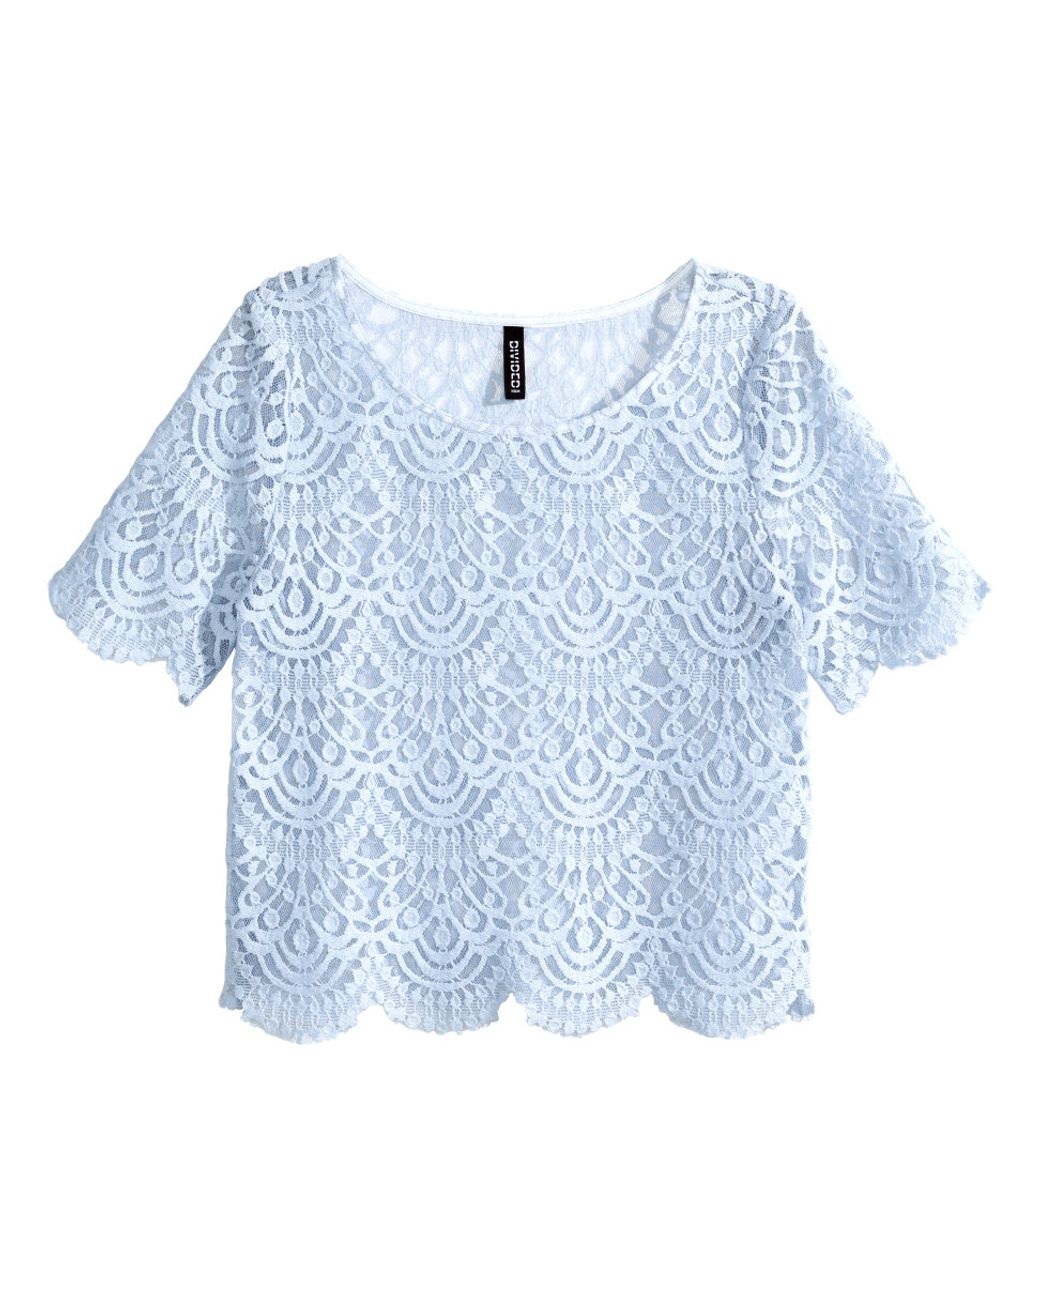 H&M Lace Top in Blue | Lyst